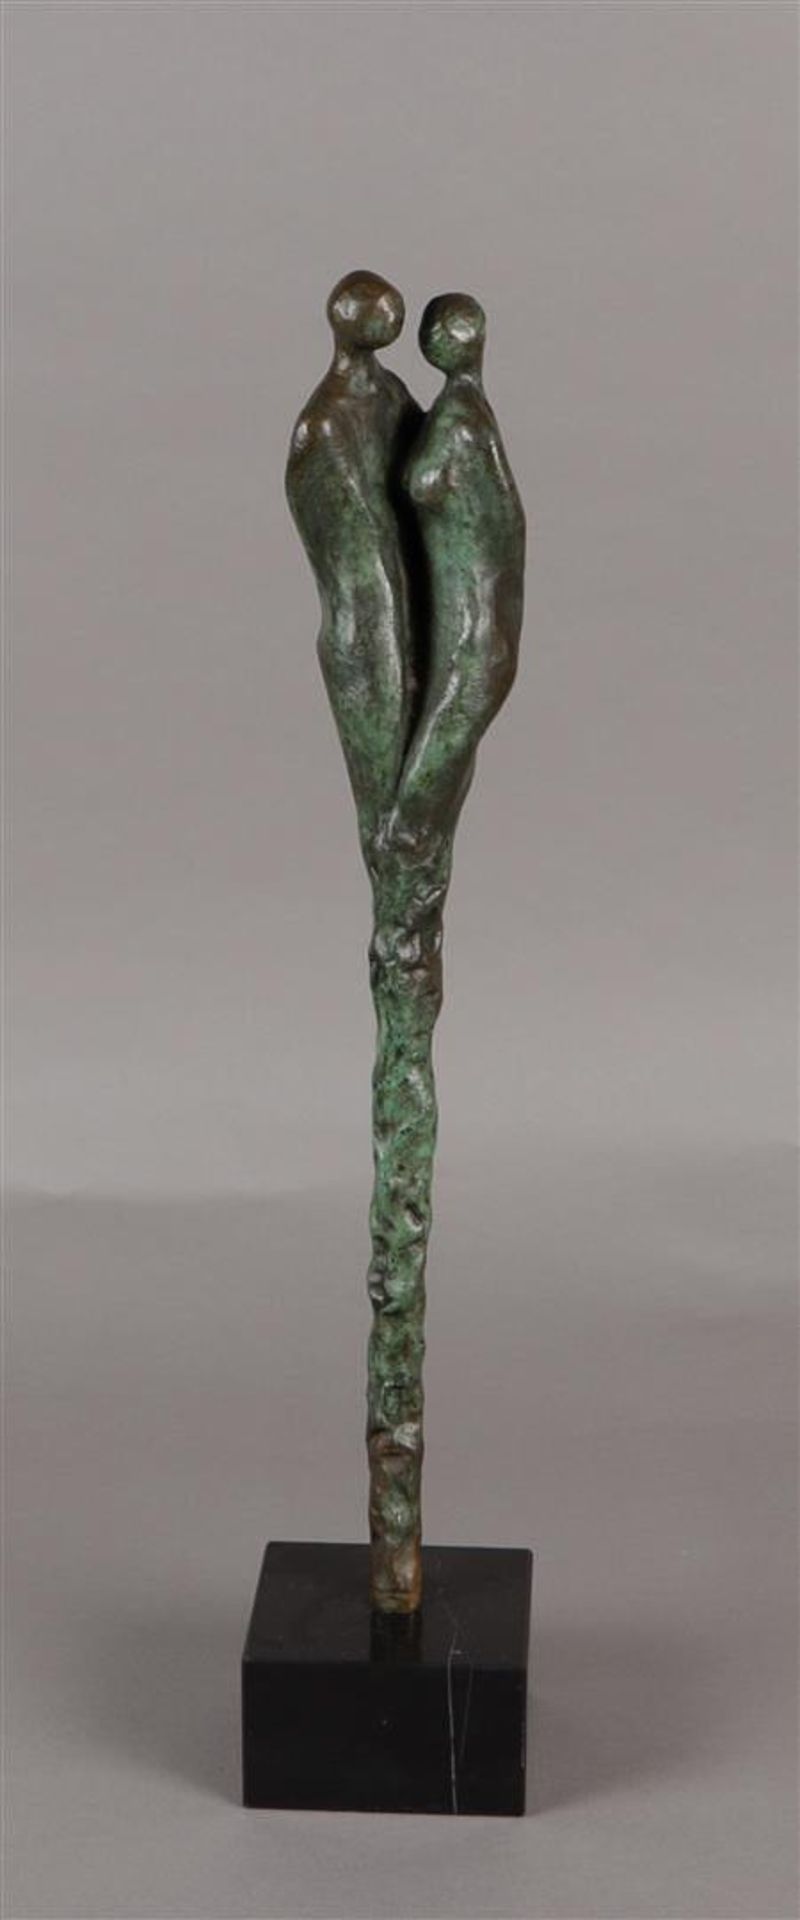 Elly de Clou (born Zoetermeer, 1953), Man and woman, bronze on honed marble base.